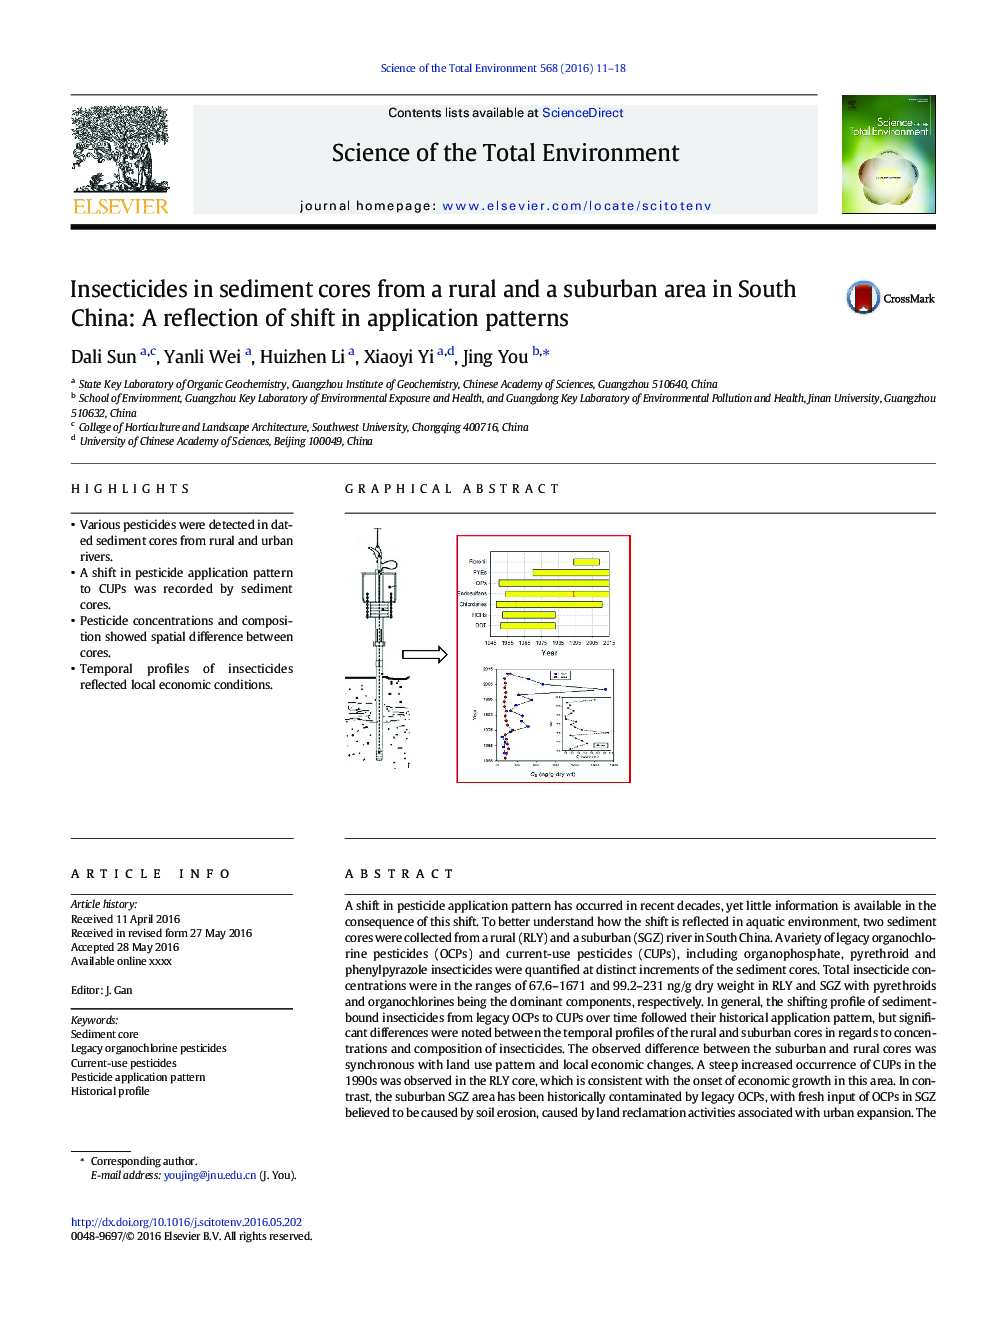 Insecticides in sediment cores from a rural and a suburban area in South China: A reflection of shift in application patterns